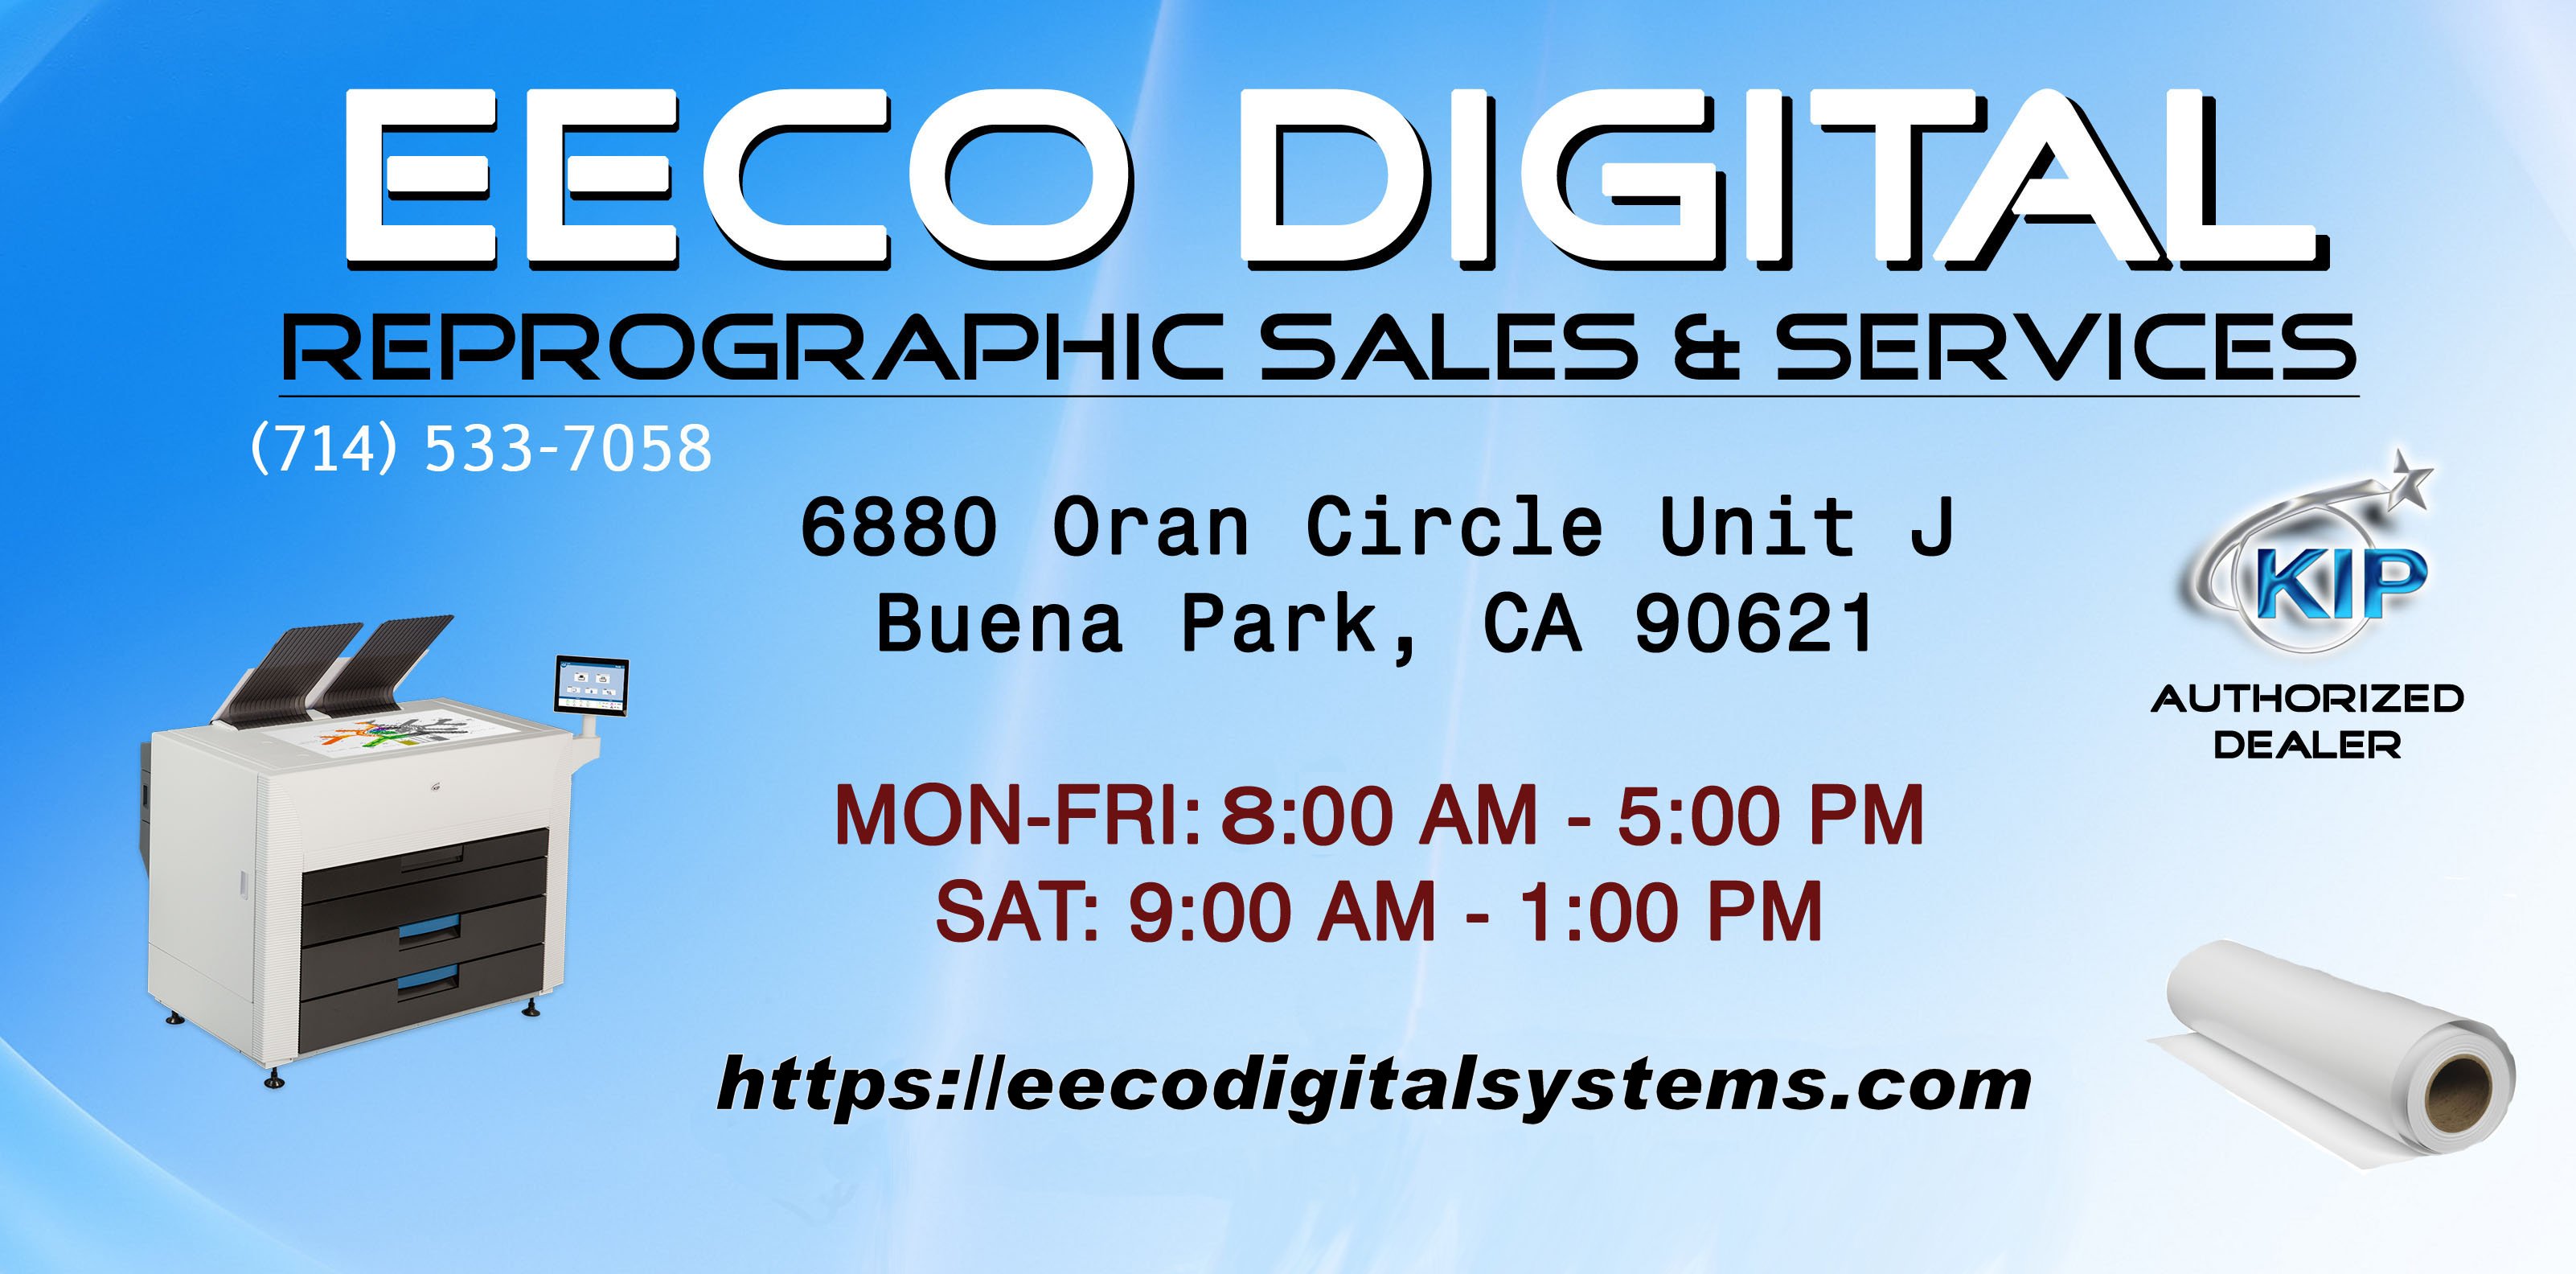 EECO DIGITAL, Printing, Print Shop, Print Shop Near Me, Large Format, Color, Black and white